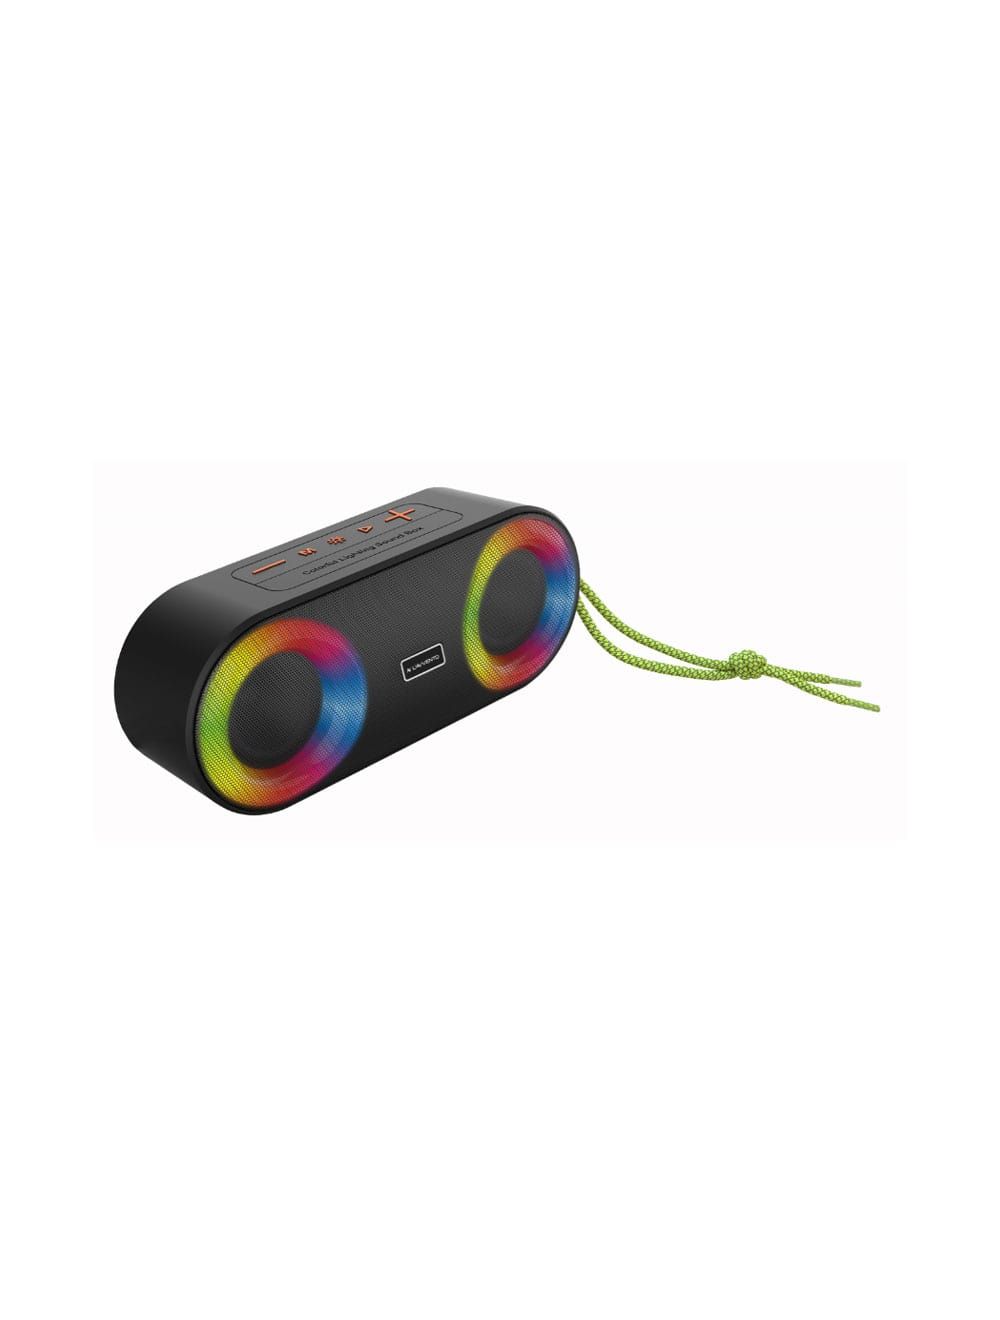 LED Flashing Light Bluetooth Speaker Anker Portable With Rope